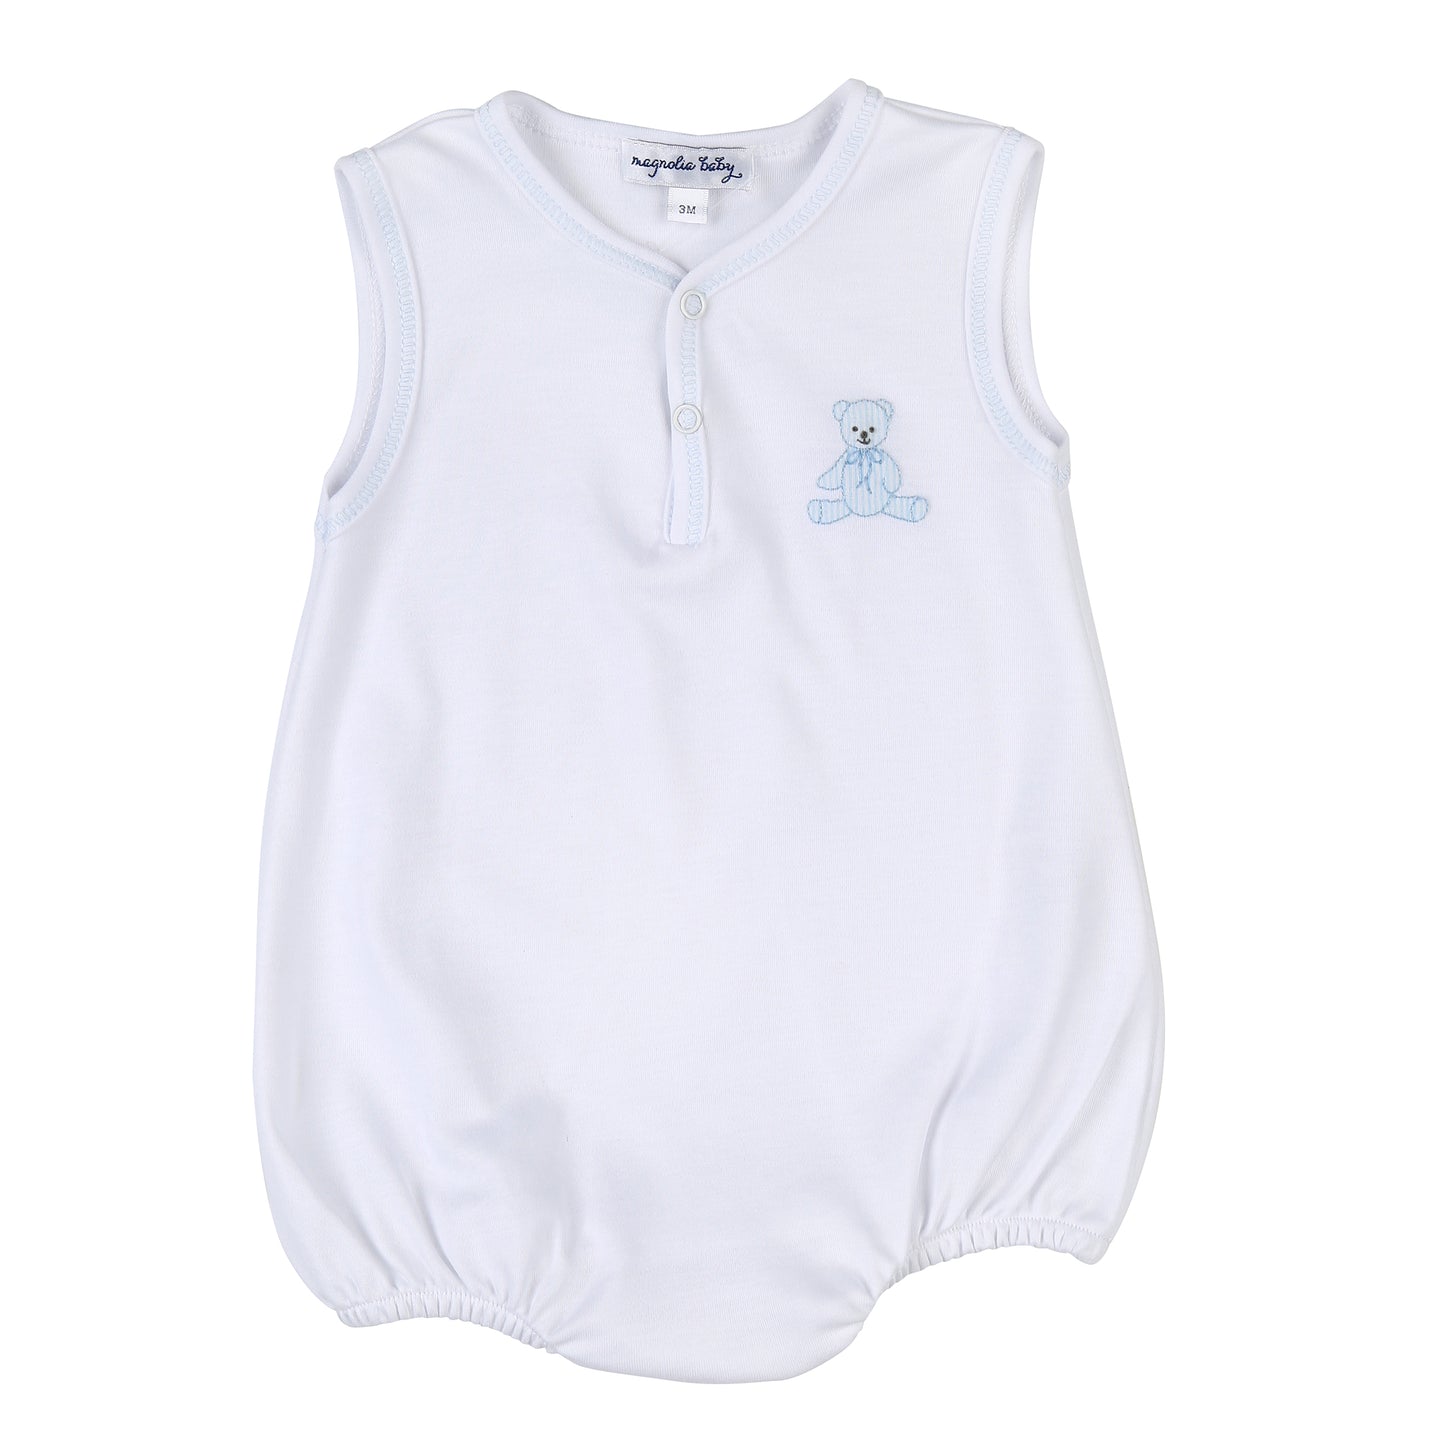 Magnolia Baby Lil' Teddies Blue Emb Front Snap Sleeveless Bubble